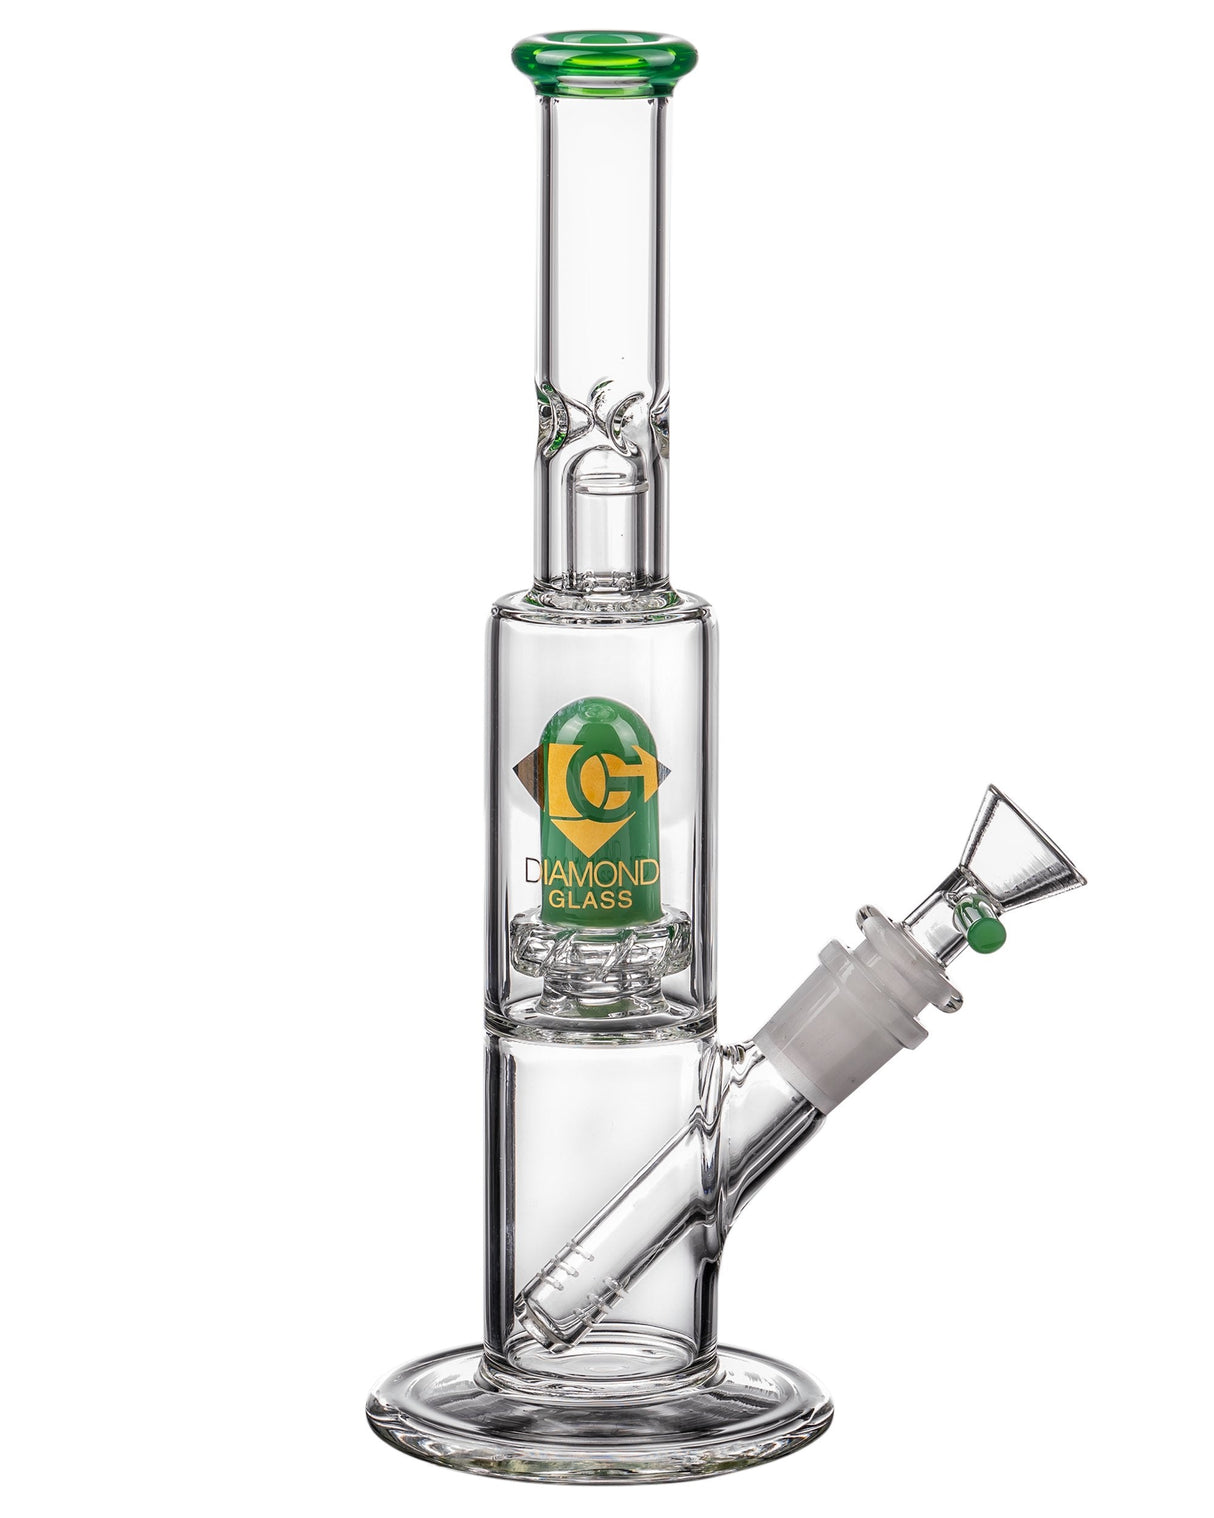 Diamond Glass Skinny Neck UFO Straight Tube Bong with Green Accents and Showerhead Percolator